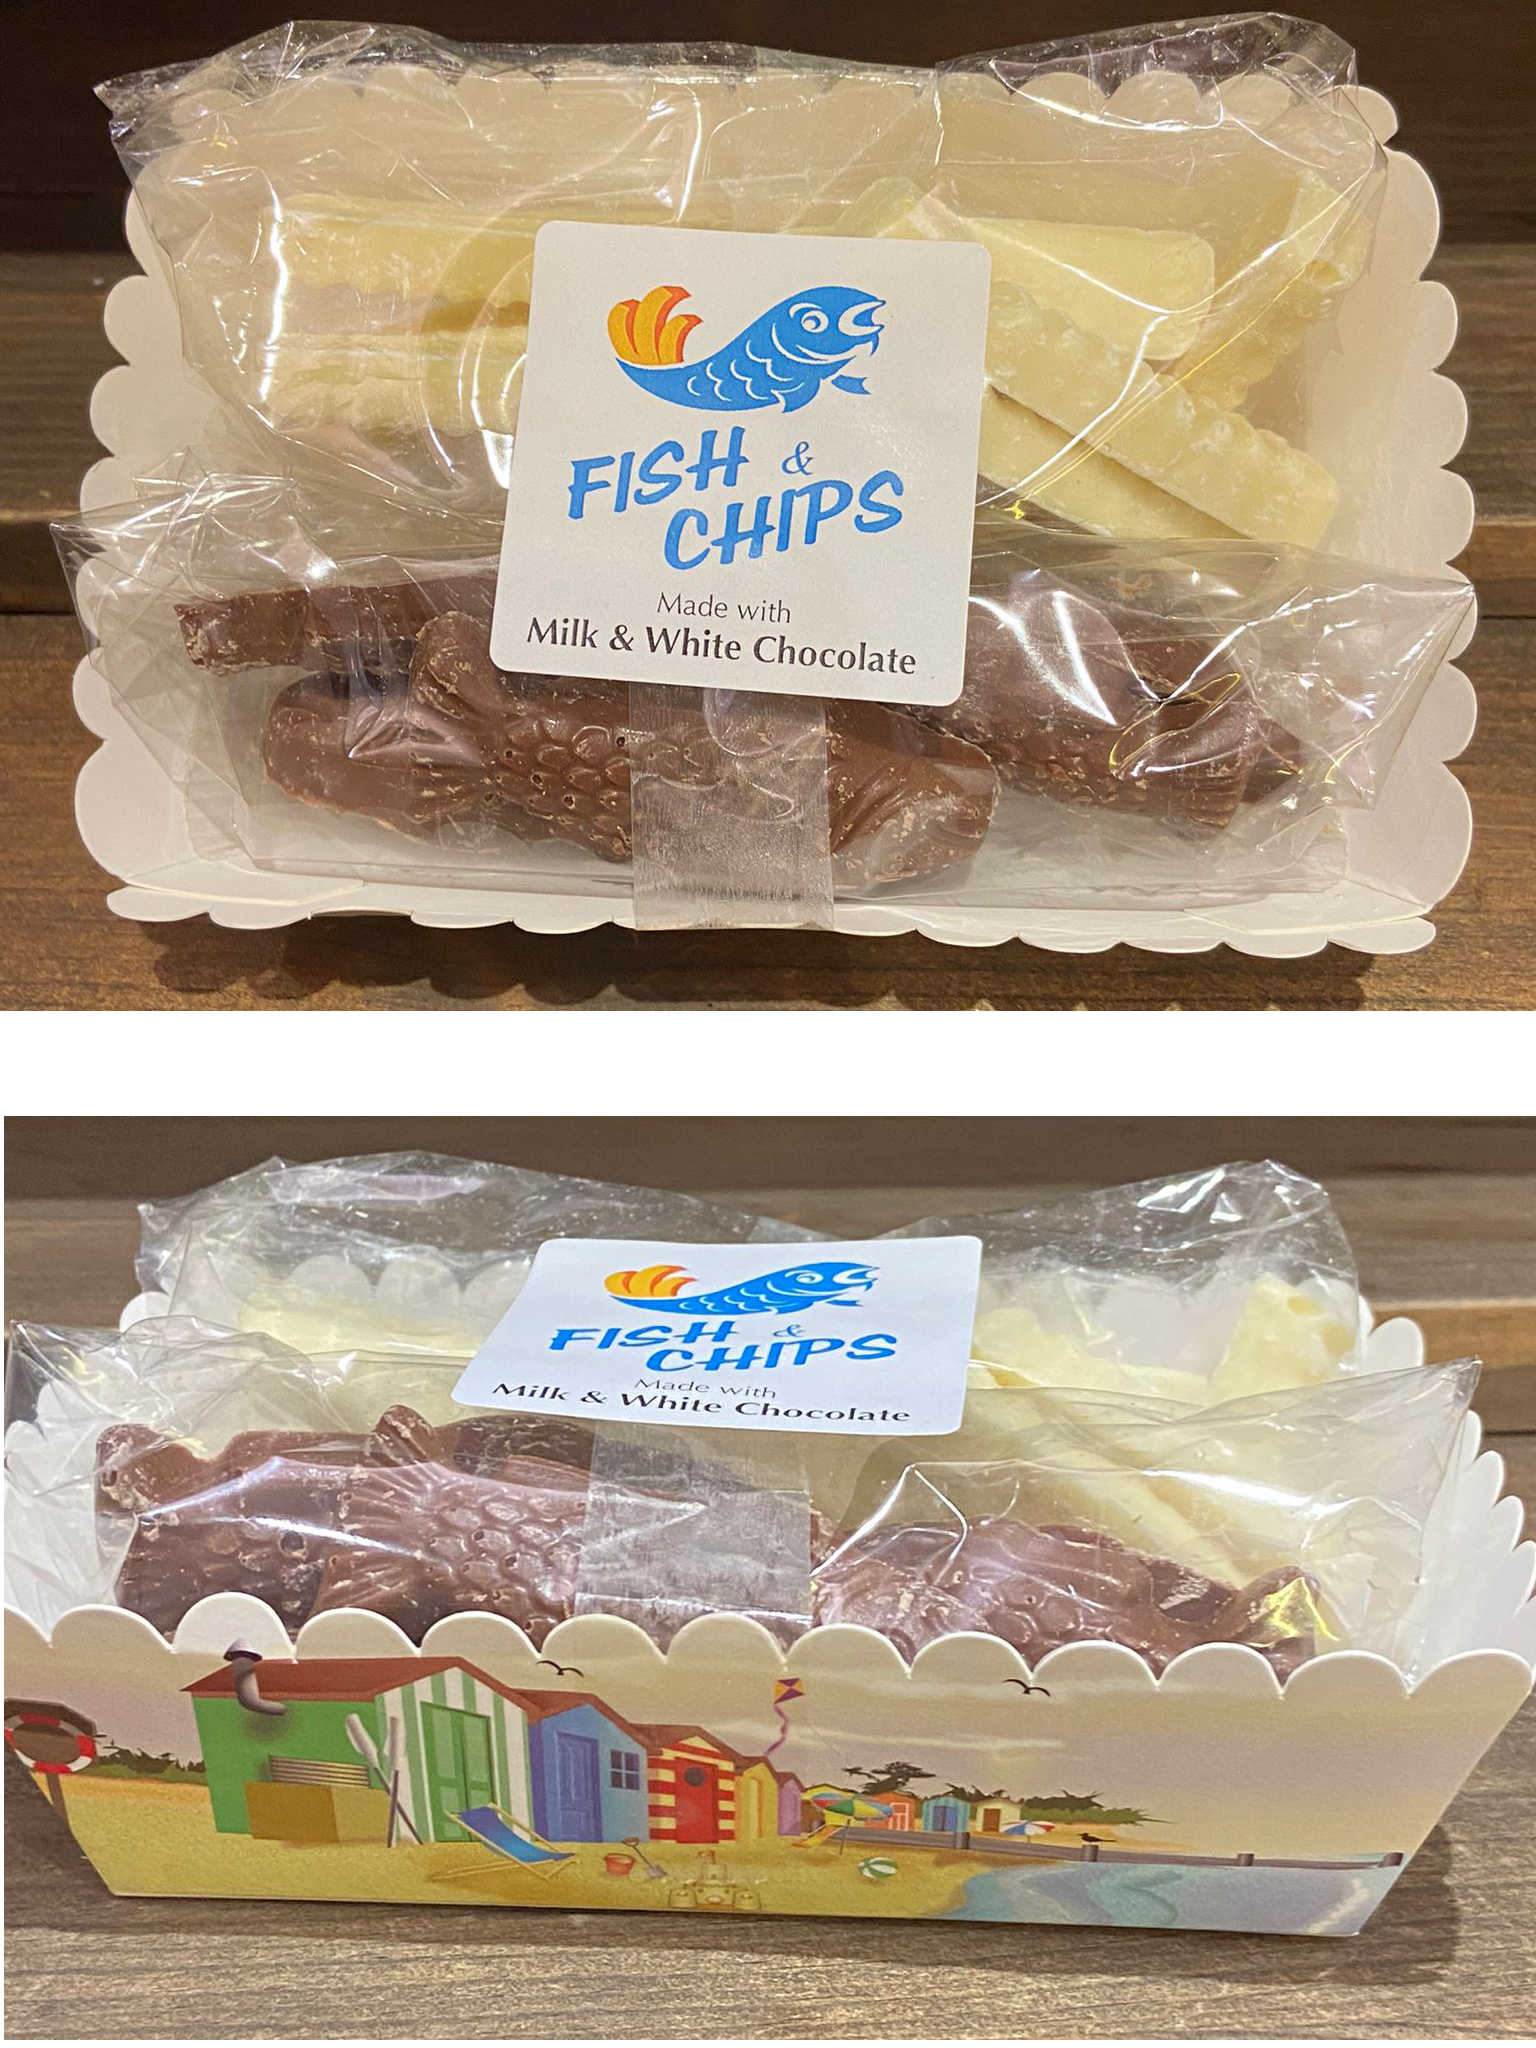 Chocolate fish and chips